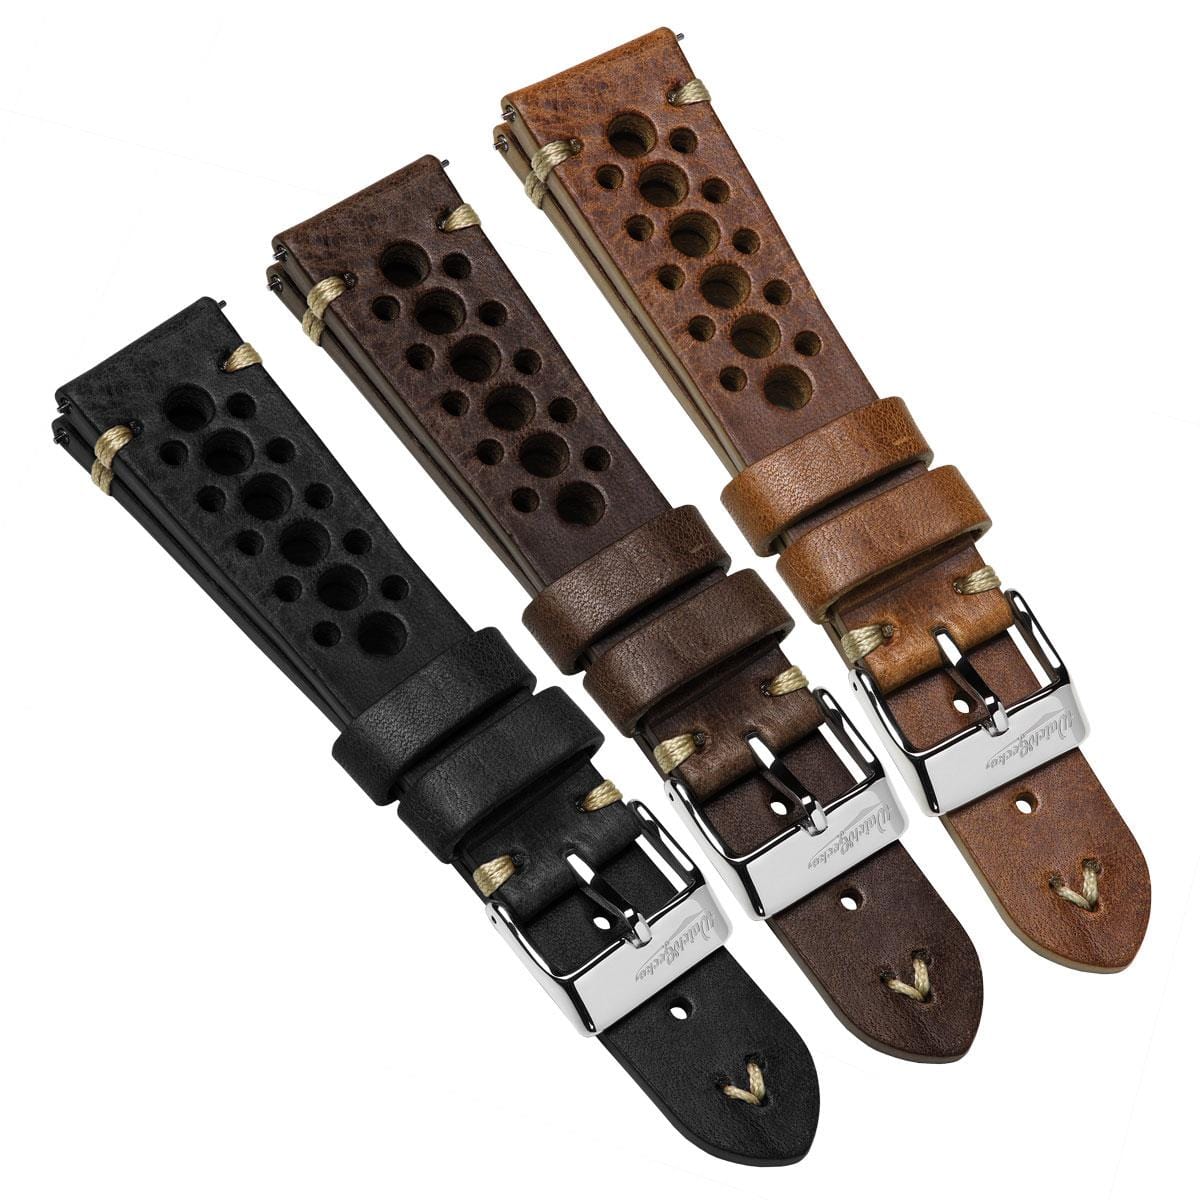 Simple Handmade Italian Leather Perforated Watch Strap - Black